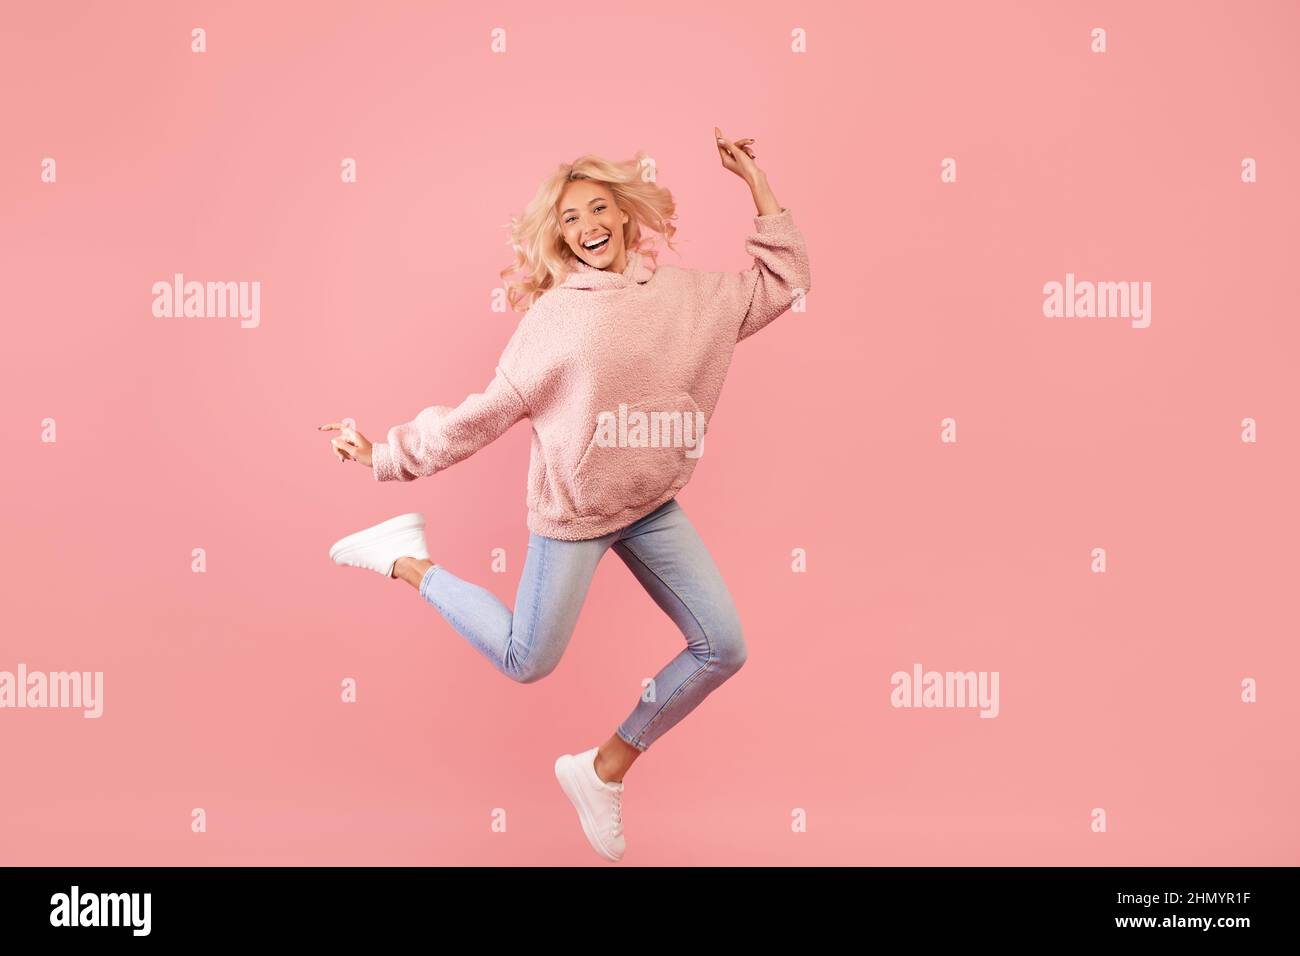 Having fun. Full body length portrait of playful lady jumping, dancing and smiling at camera, being in a good mood Stock Photo